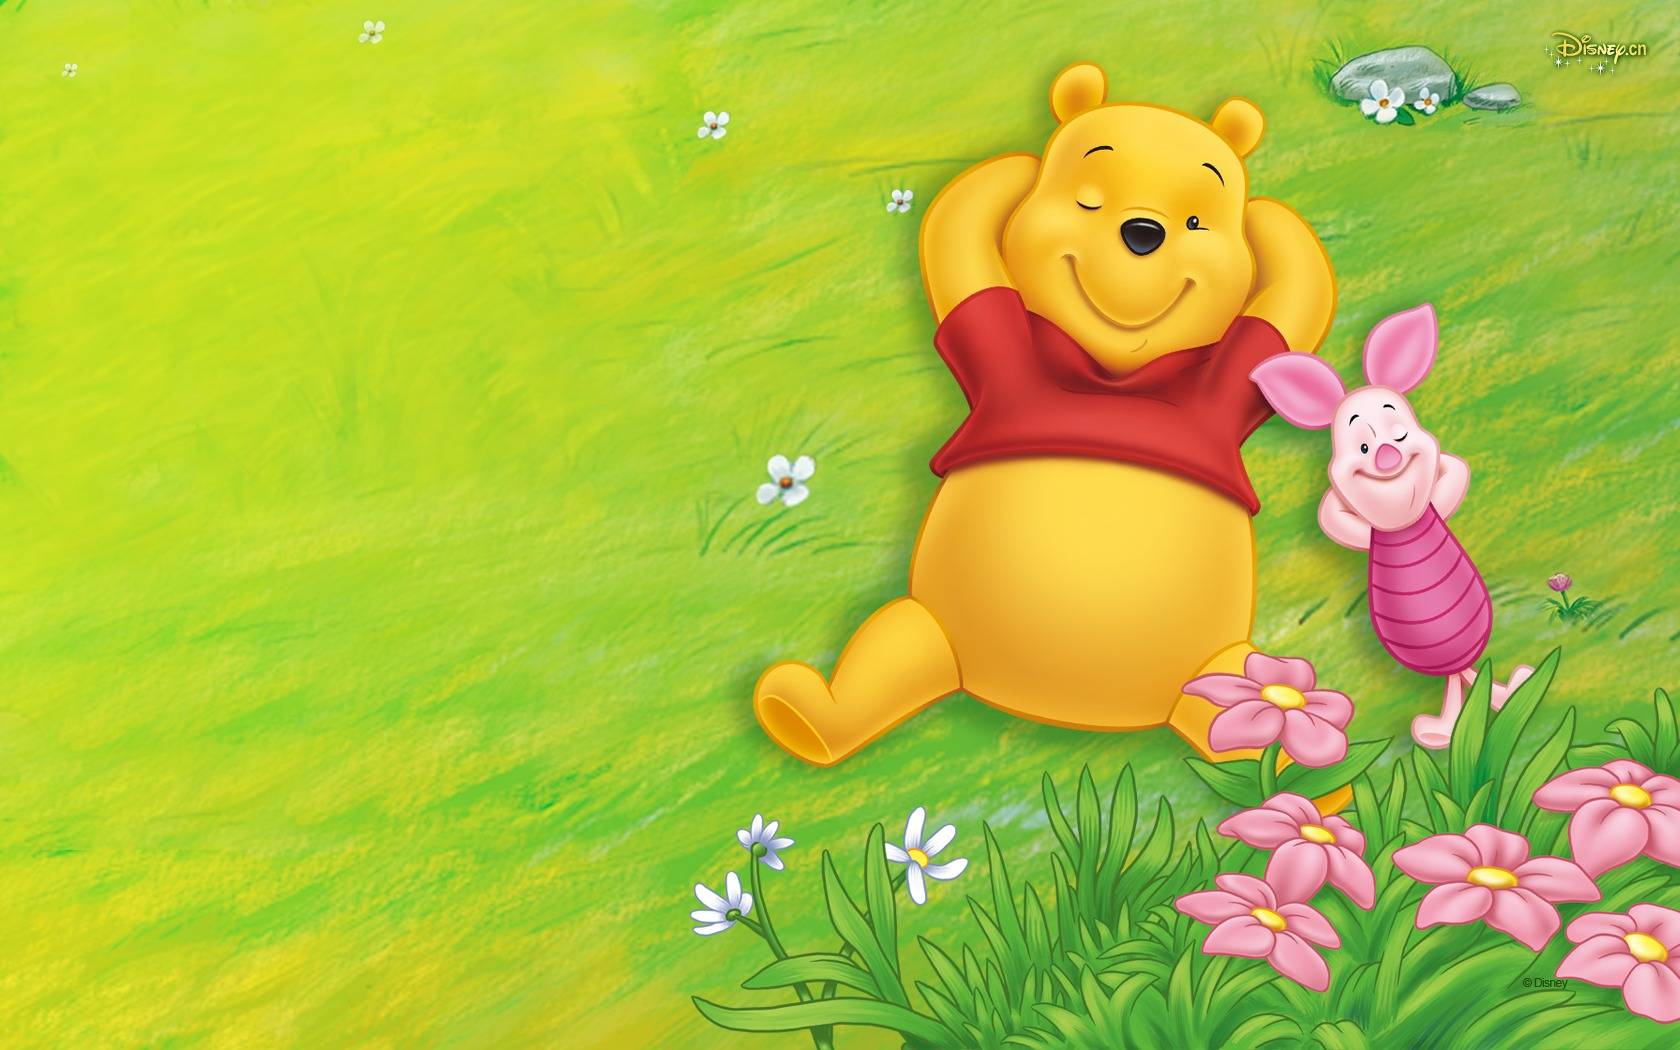 Innie The Pooh and Piglet Origin HD Wallpaper, Background Image